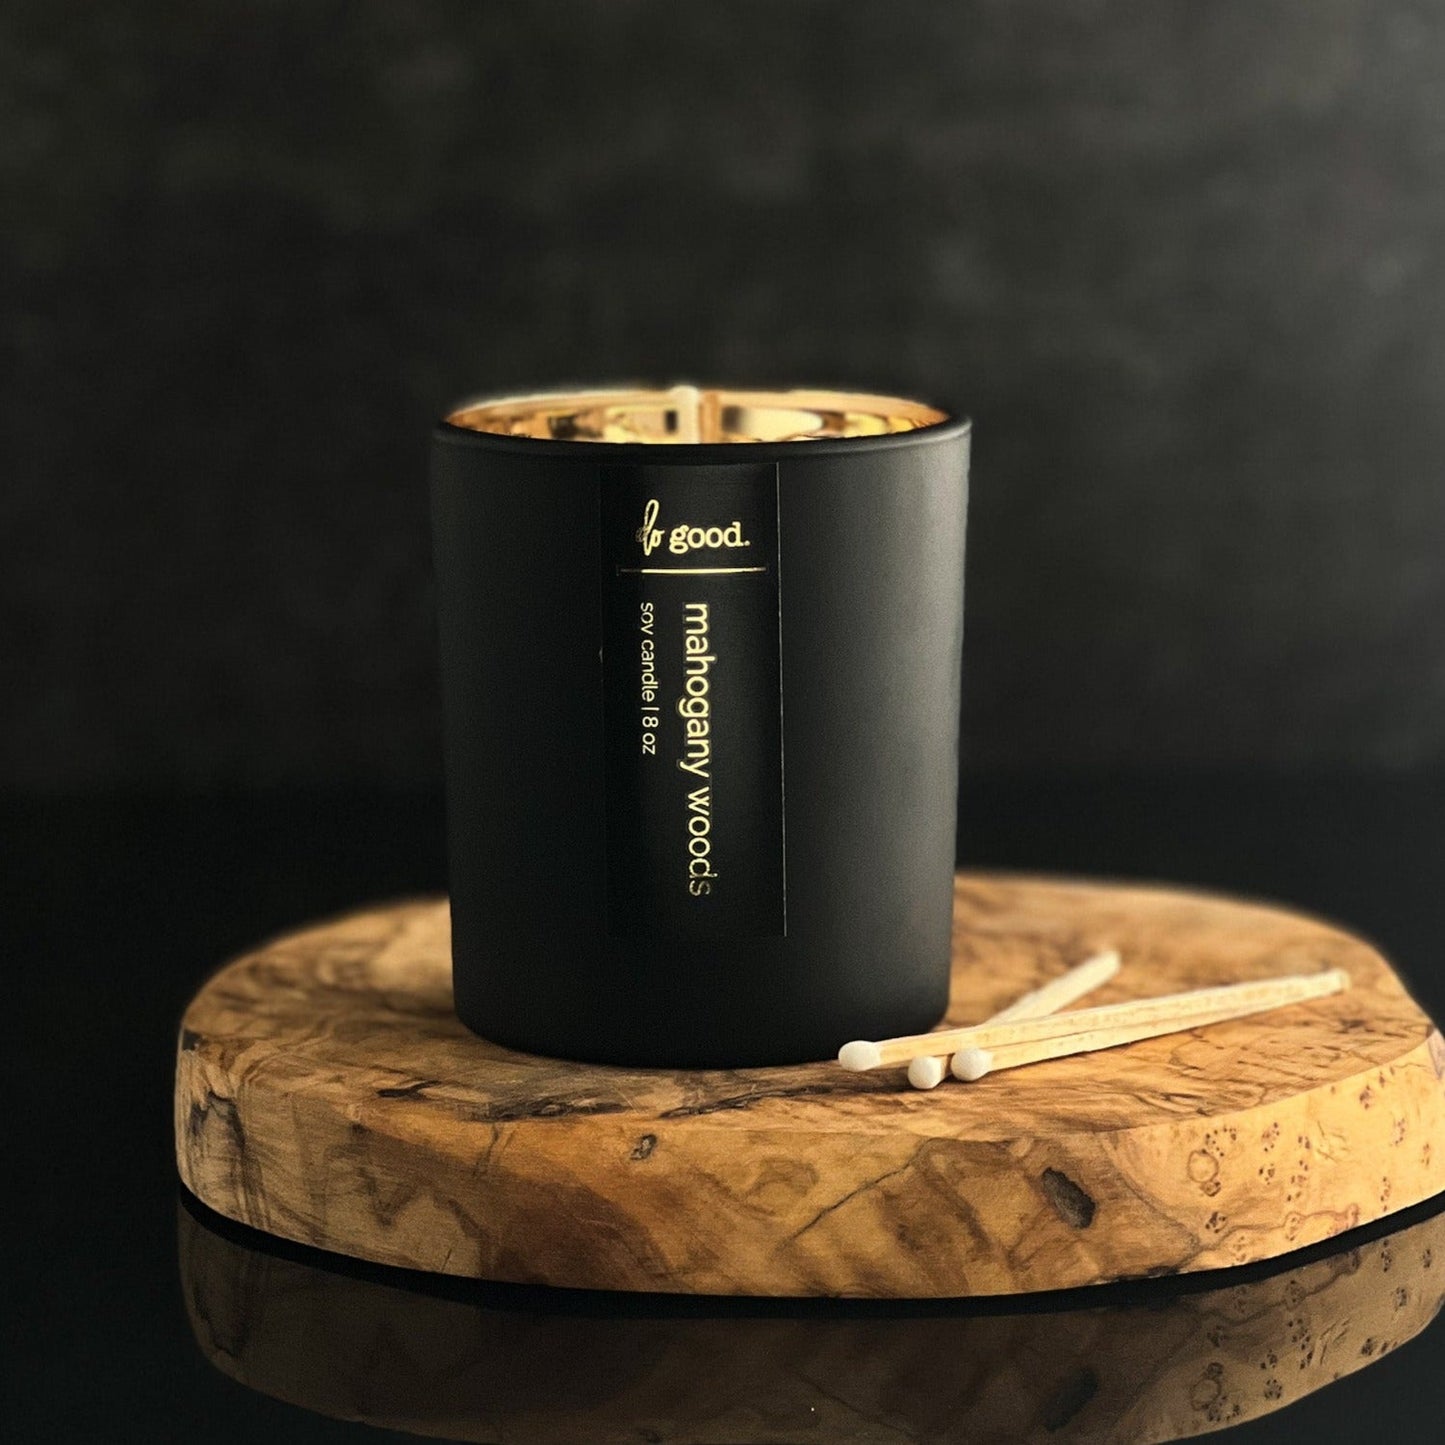 soy candle named mahogany woods in a matte black vessel with a gold electroplated interior